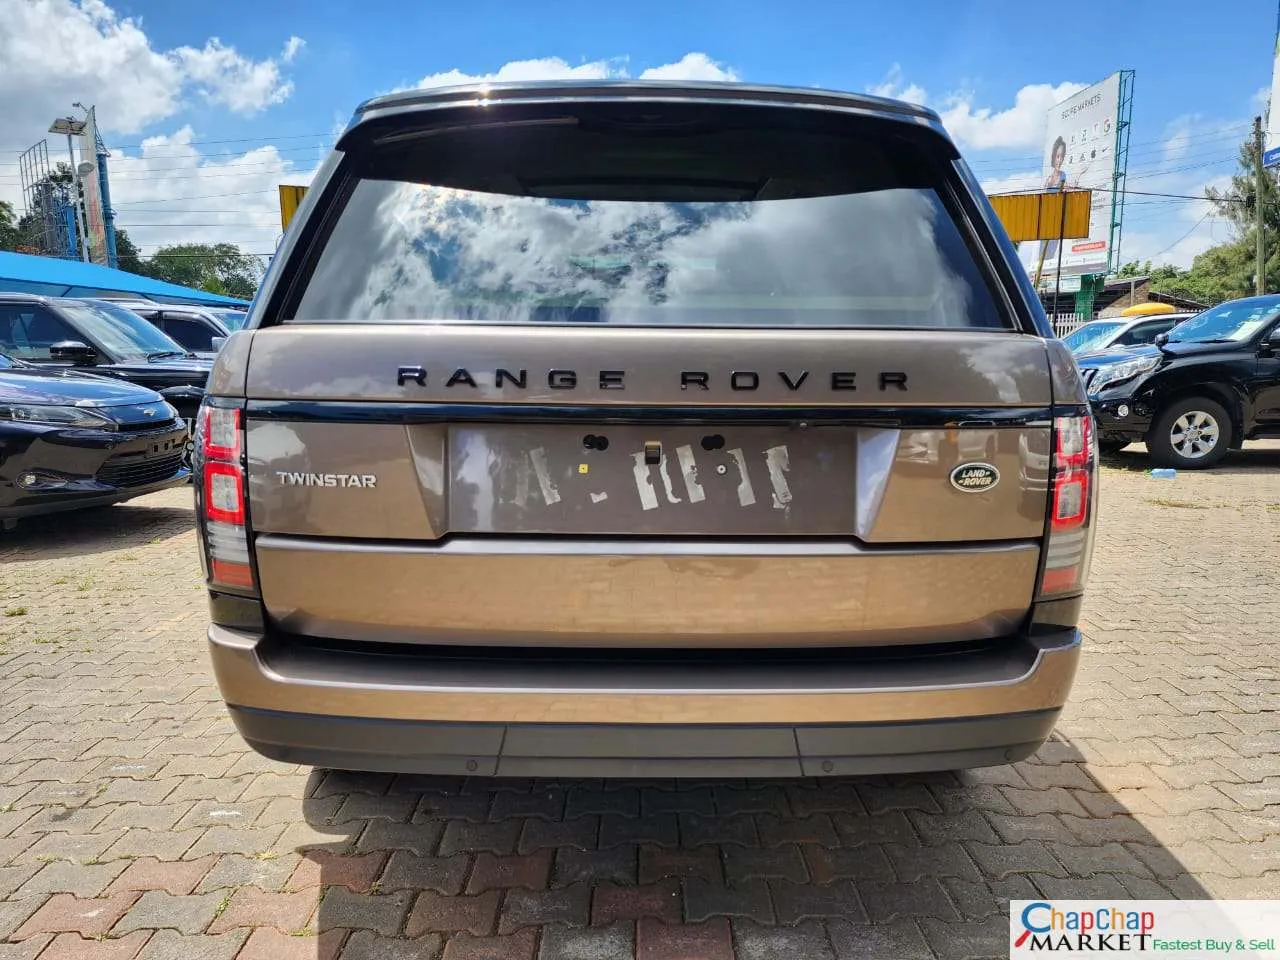 RANGE ROVER VOGUE 4.4 SDV8 AUTOBIOGRAPHY SUNROOF Trade in OK EXCLUSIVE